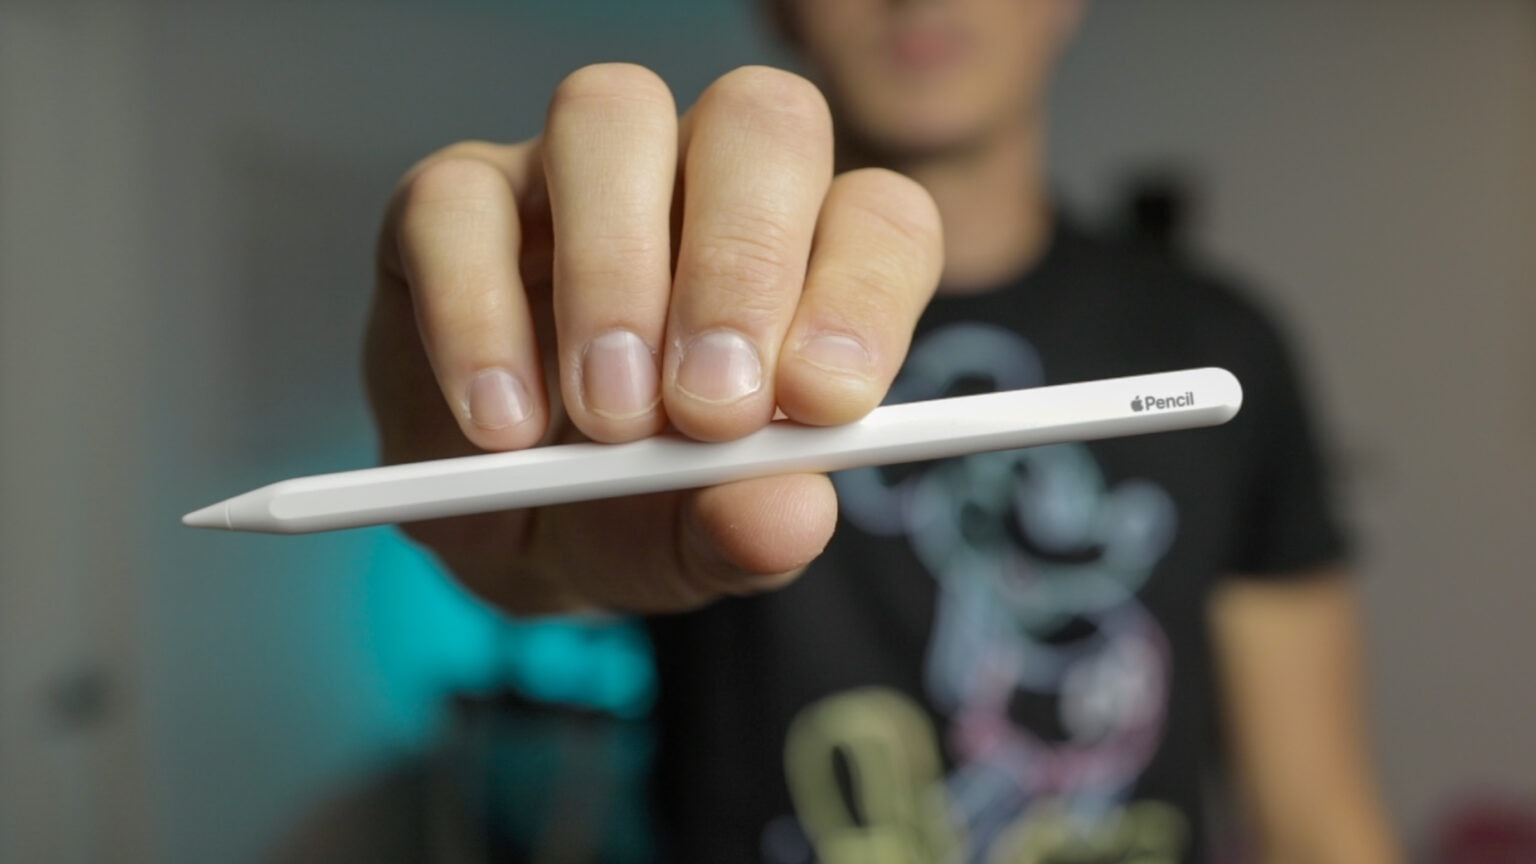 Apple Pencil 2 in Hand